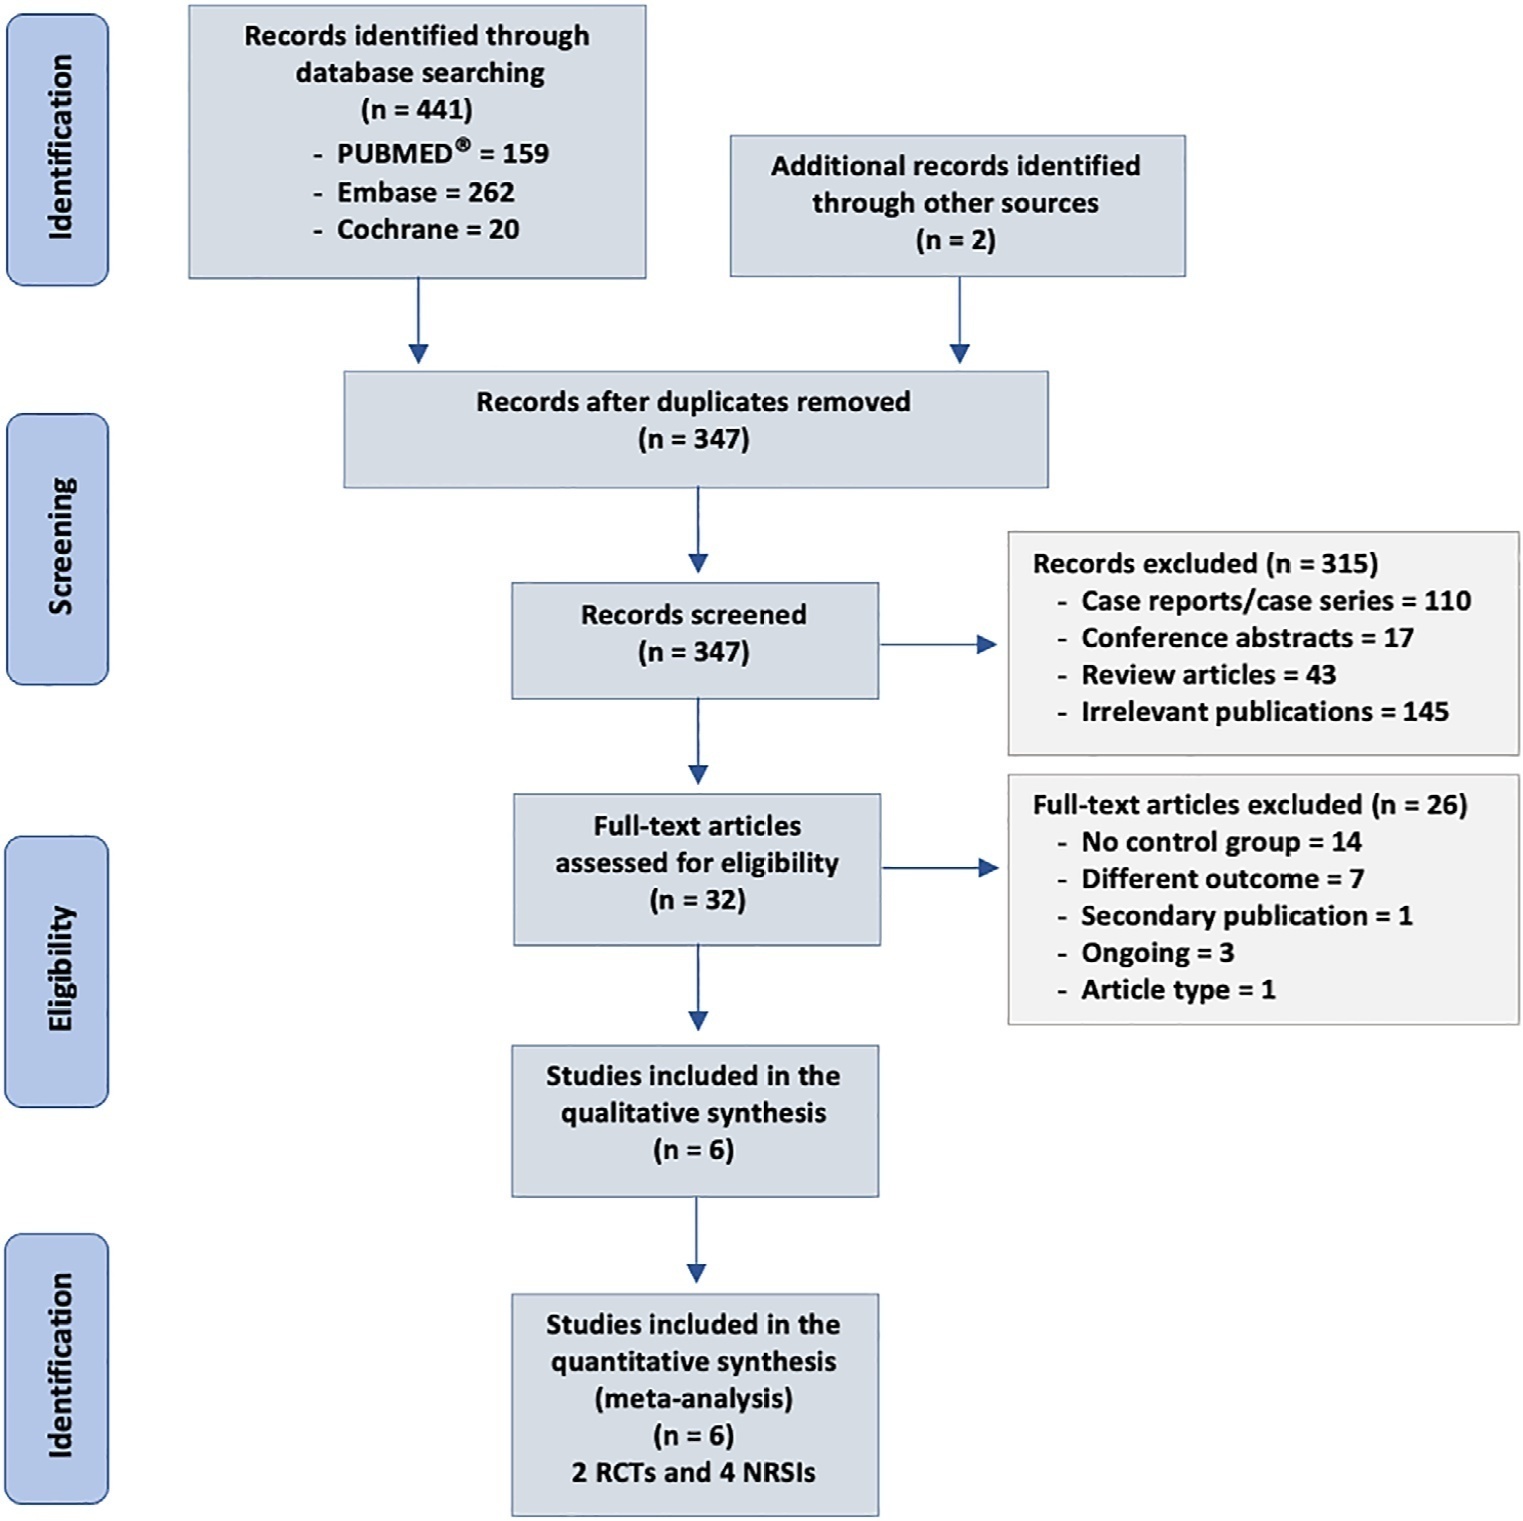 Cytokine hemoadsorption with CytoSorb® in patients with sepsis: a systematic review and meta-analysis